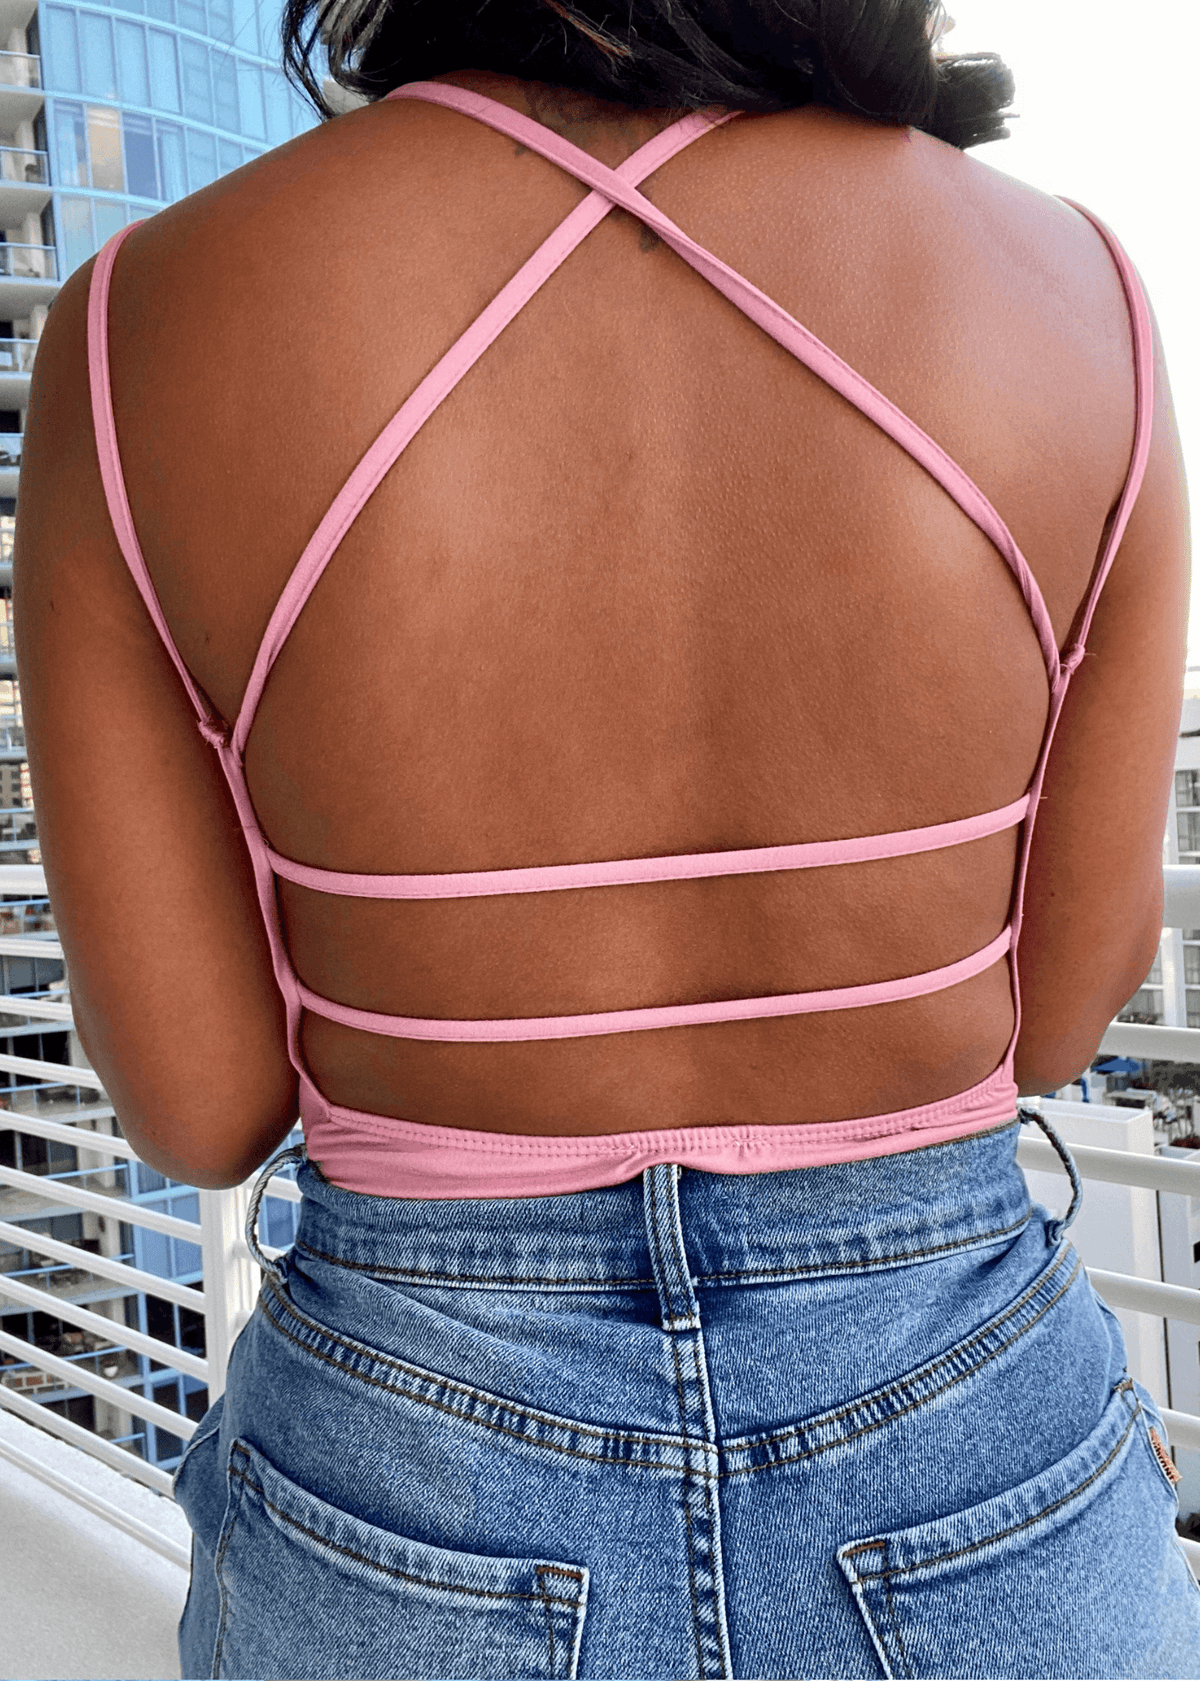 Get trendy with Criss-Cross Pink Bodysuit - Tops available at ELLE TENAJ. Grab yours for $10.00 today!